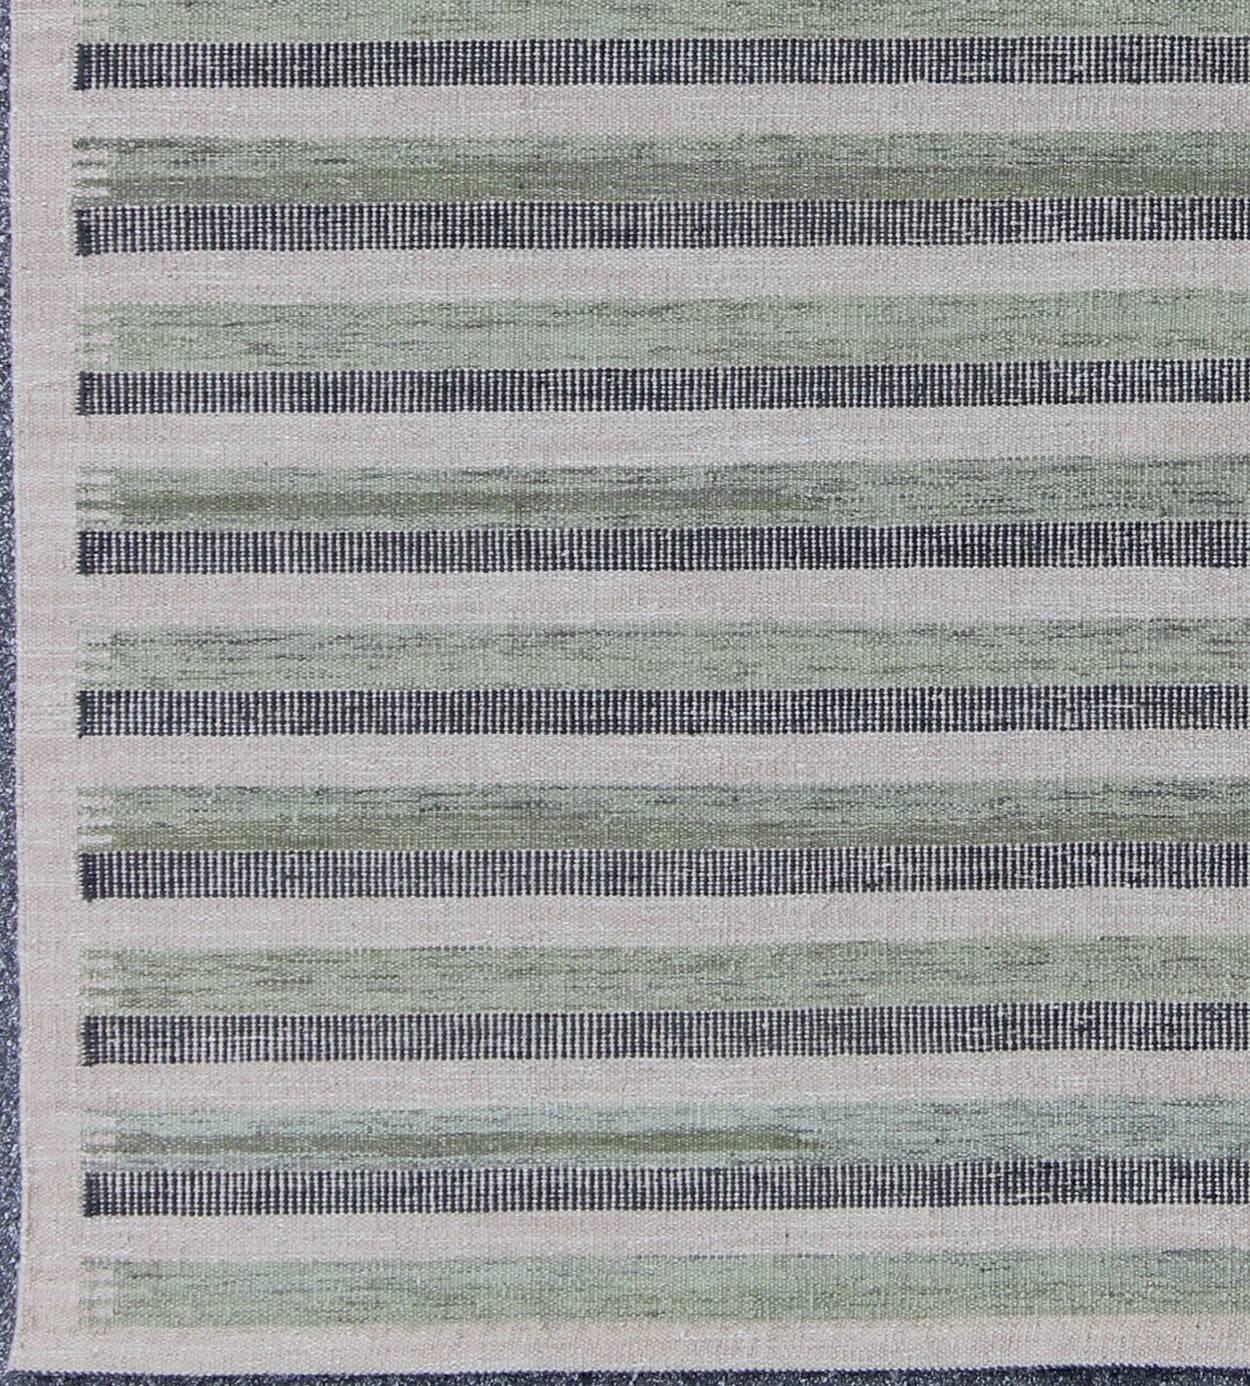 This modern Scandinavian flat-weave patterned rug is inspired by the work of Swedish textile designers of the early to mid-20th century. With a unique blend of historical and modern design, this dynamic and exciting composition is beautifully suited